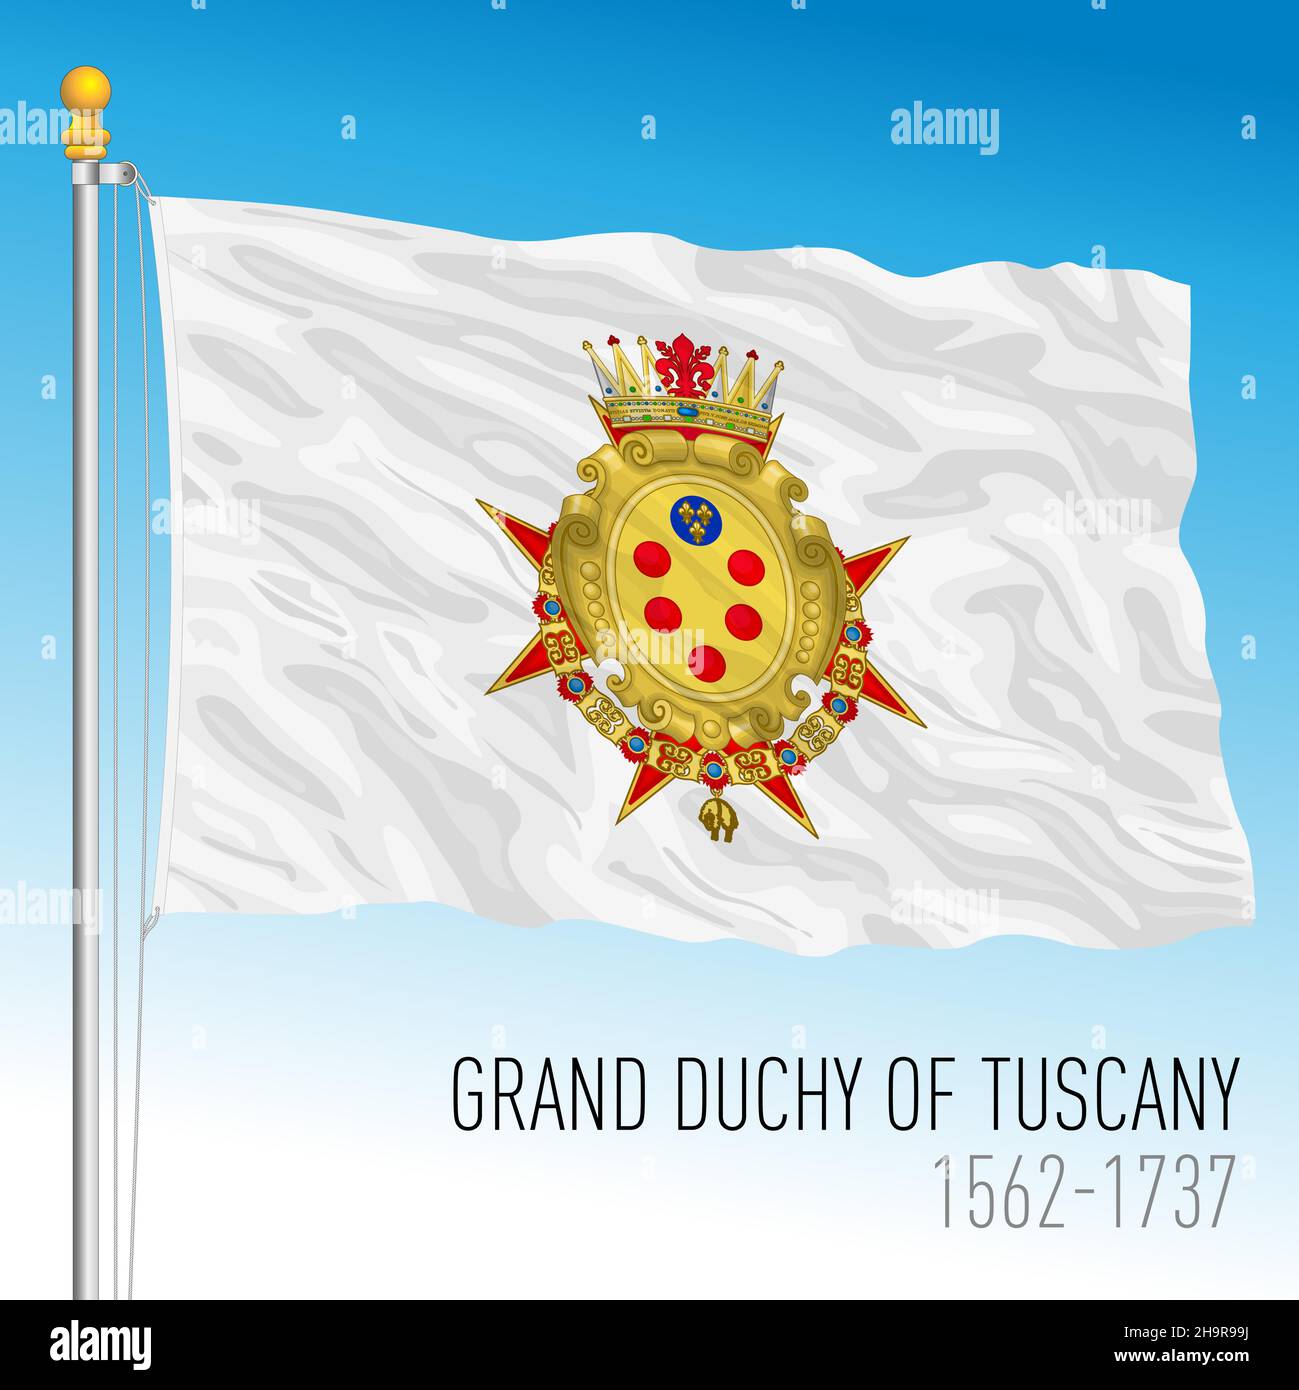 Grand Duchy of Tuscany historical flag, Italy, 1562-1737, vector illustration Stock Vector